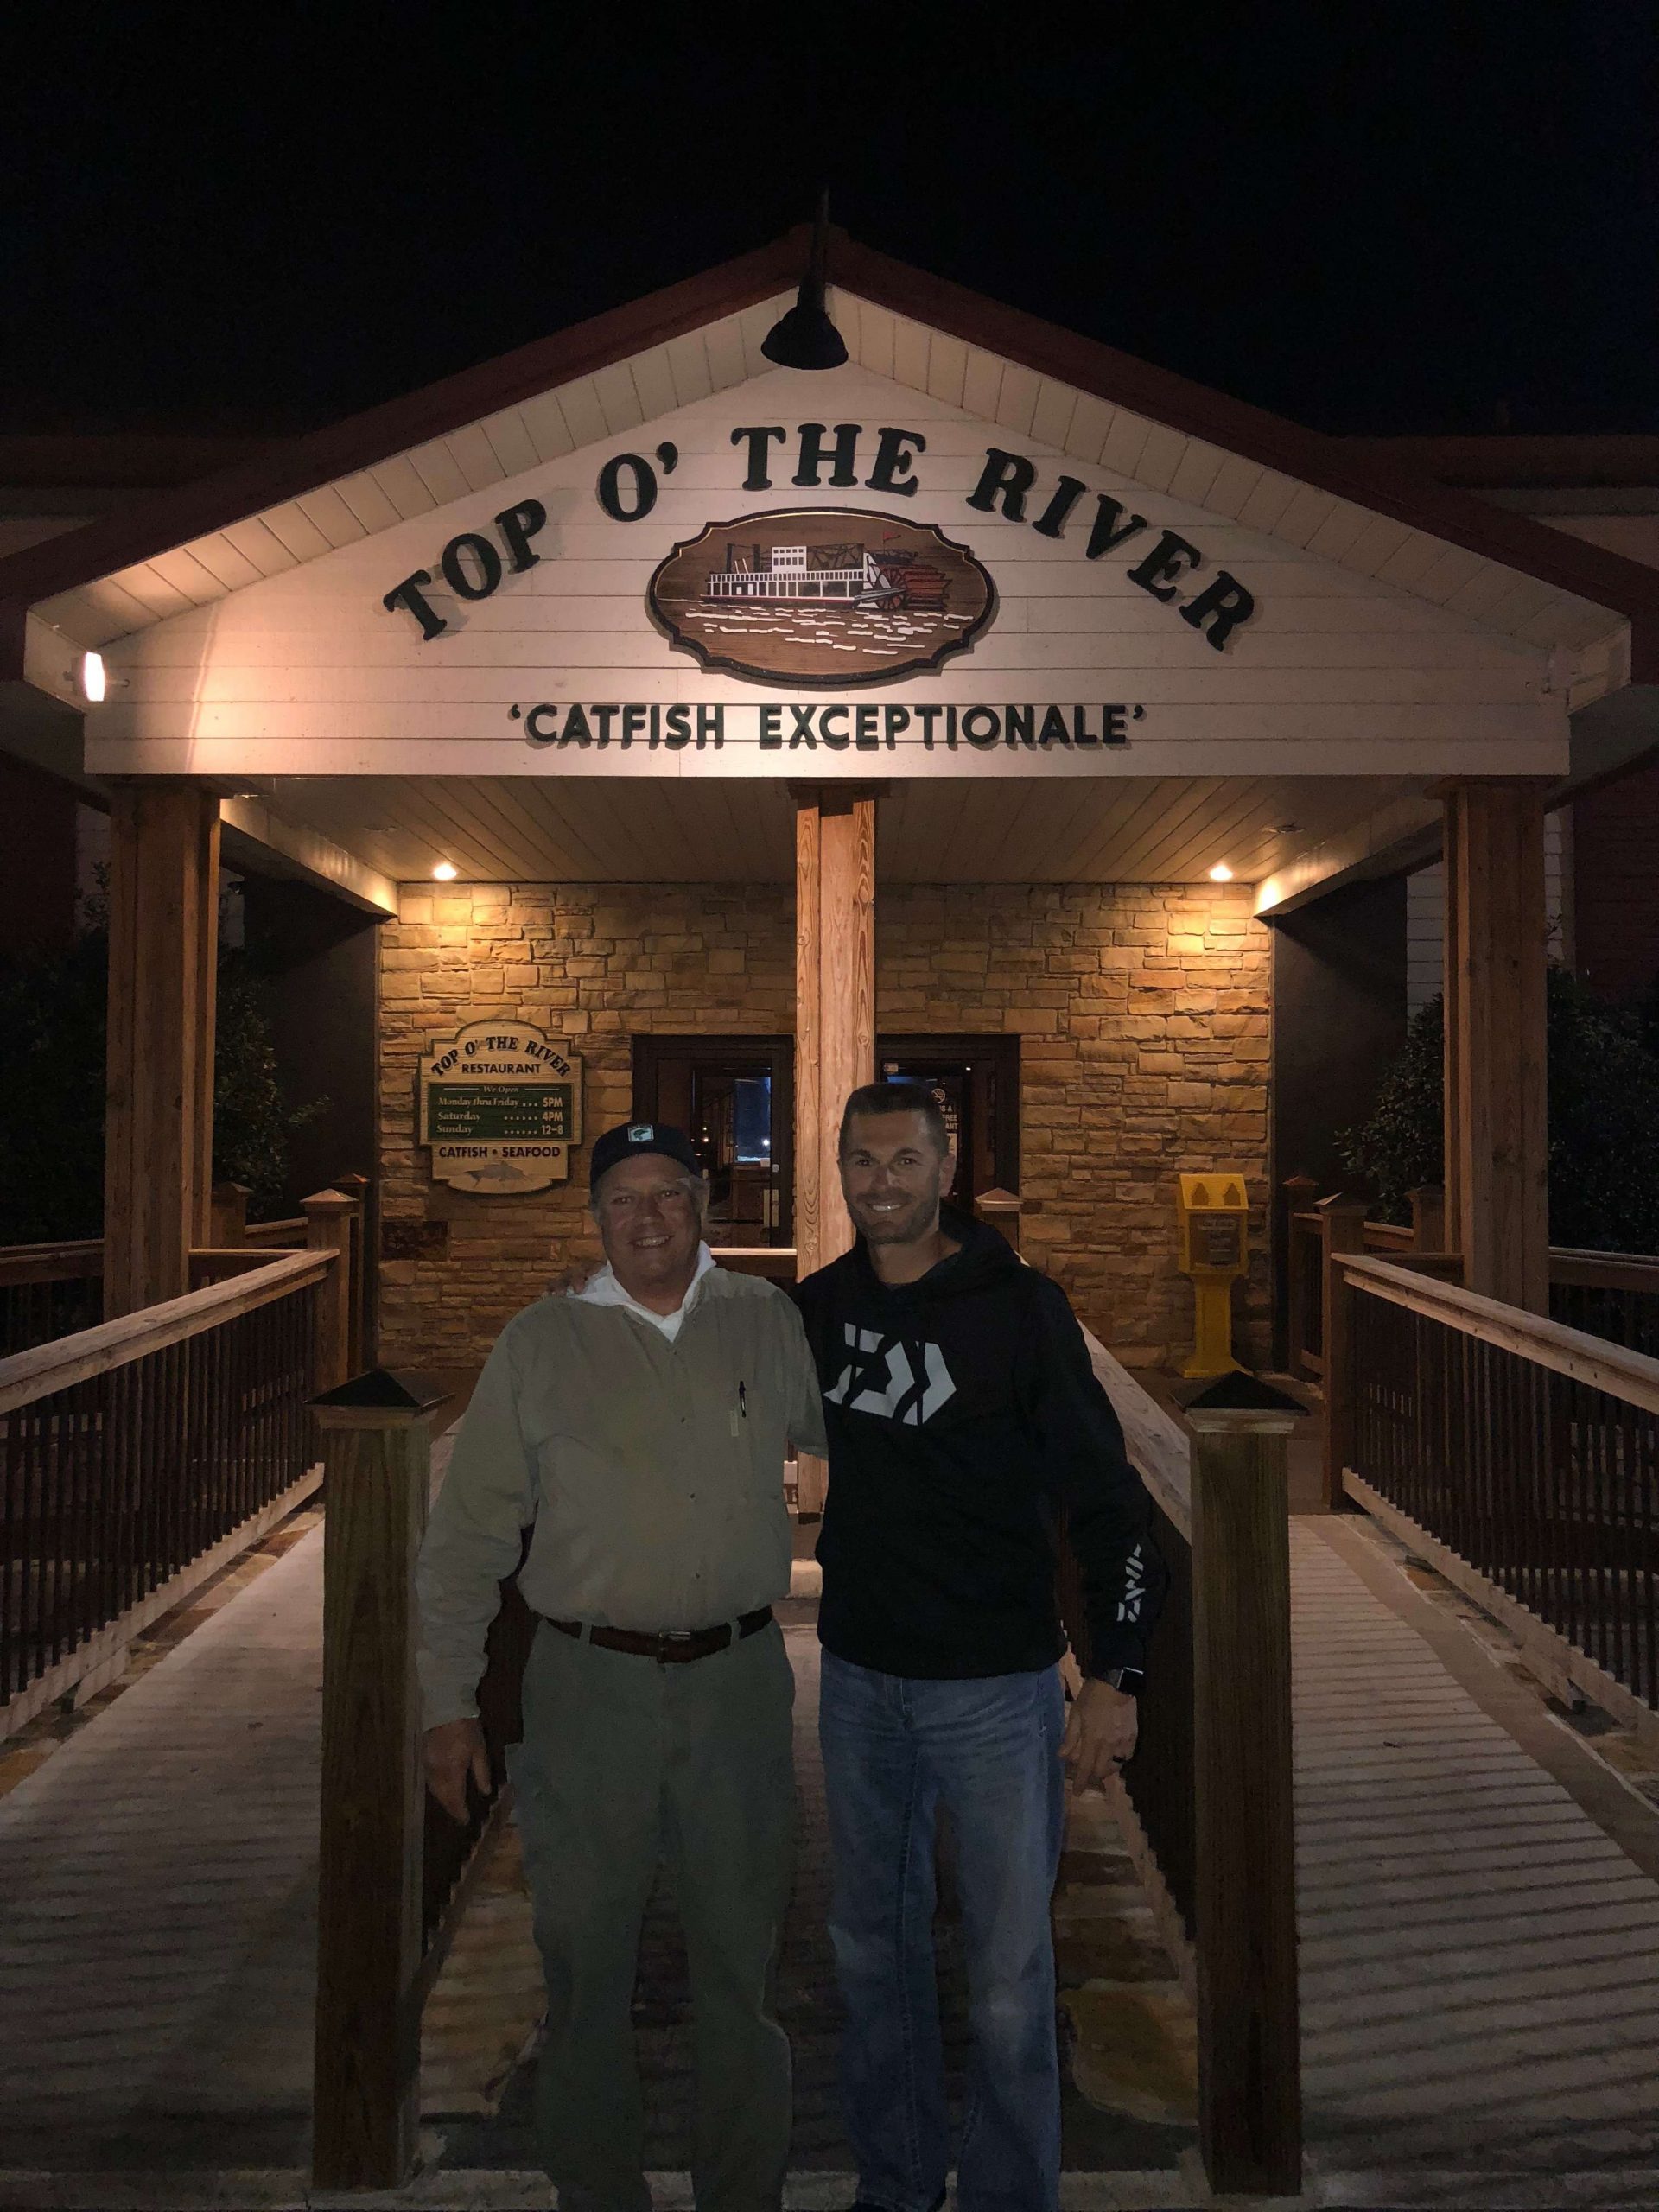 After a full day of fishing, Randy and Walt headed off to the Top O the River restaurant in Guntersville for a hot meal.